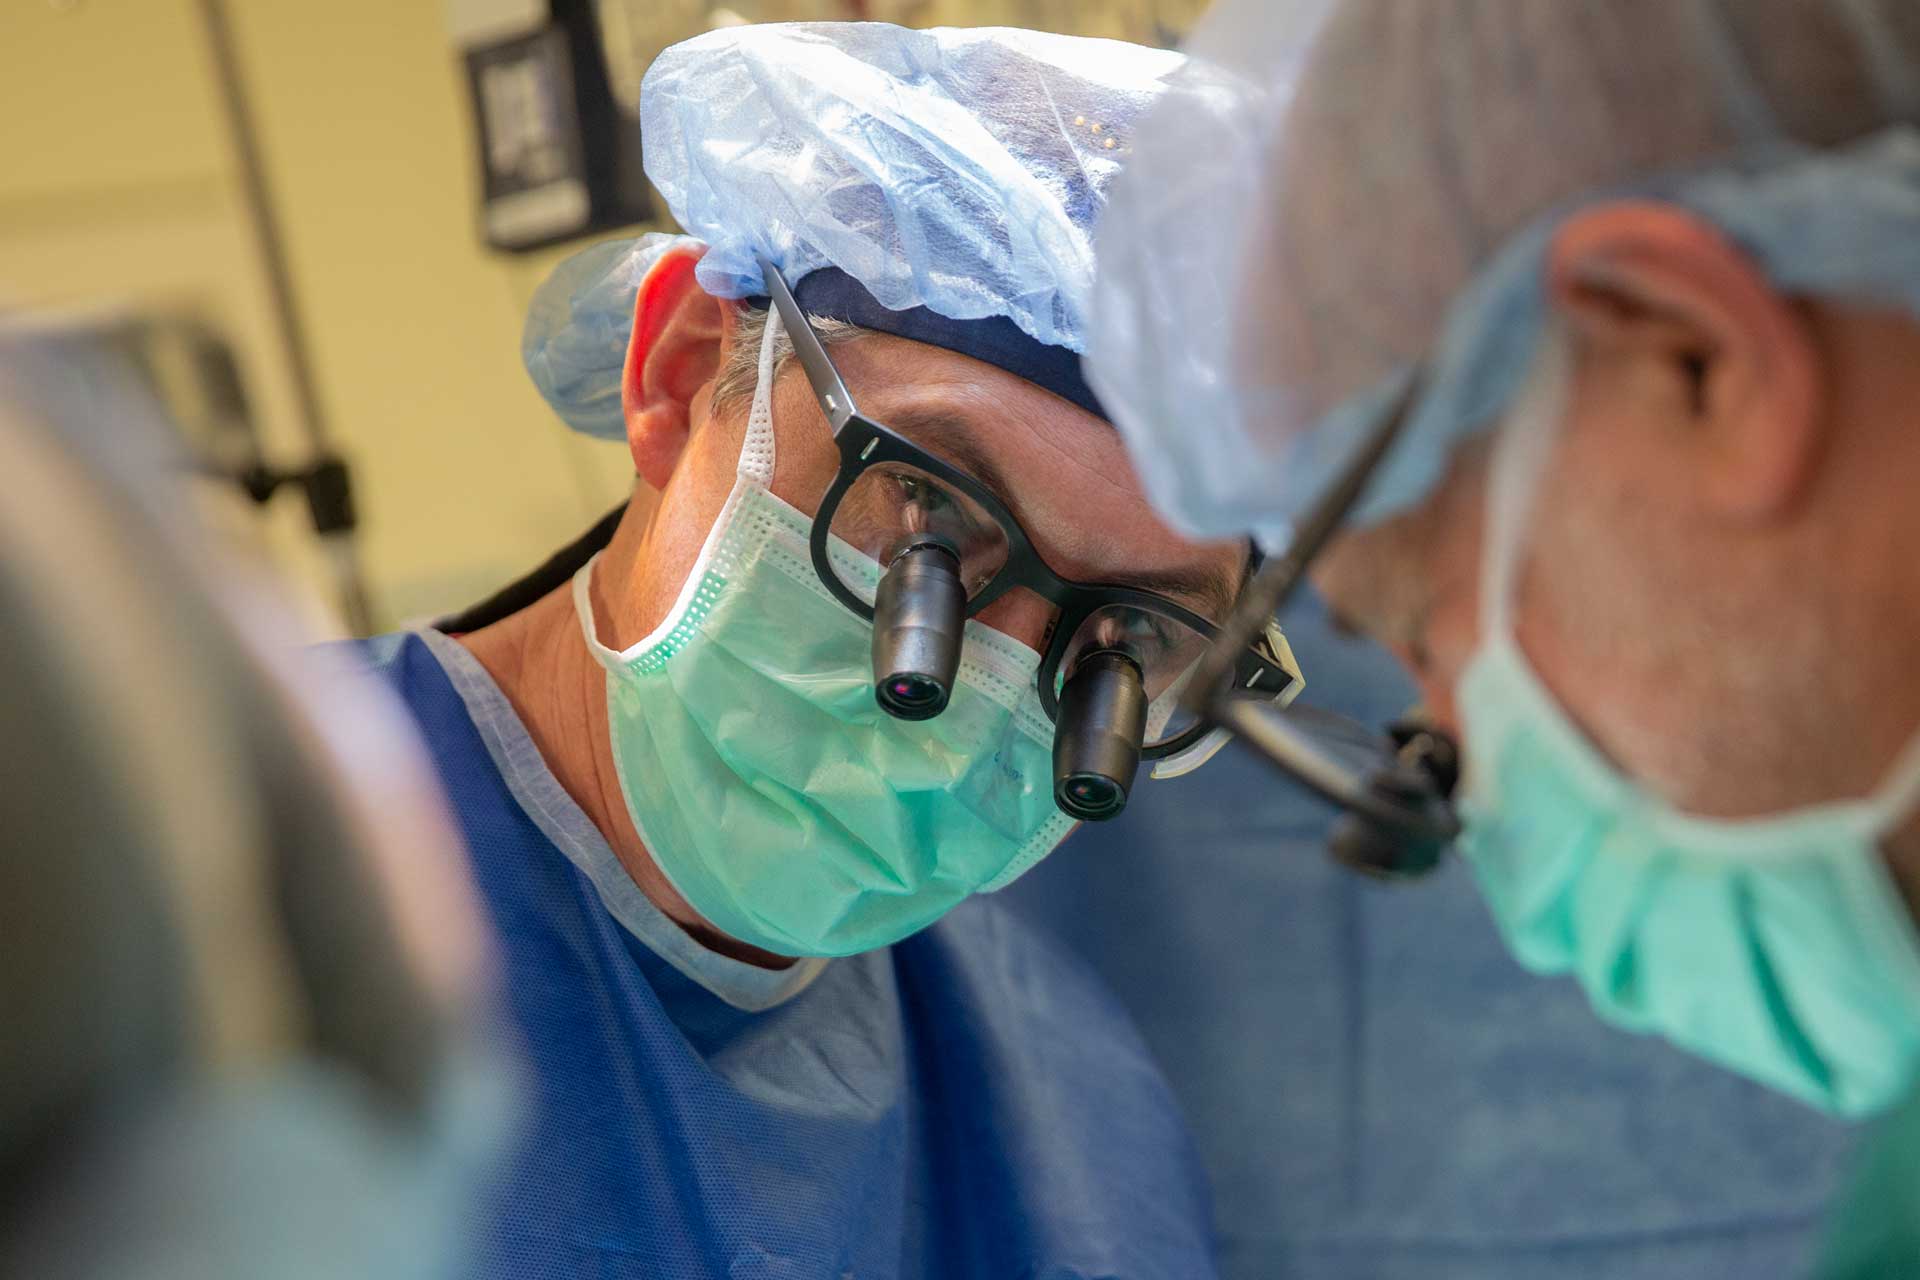 A provider in the operating room